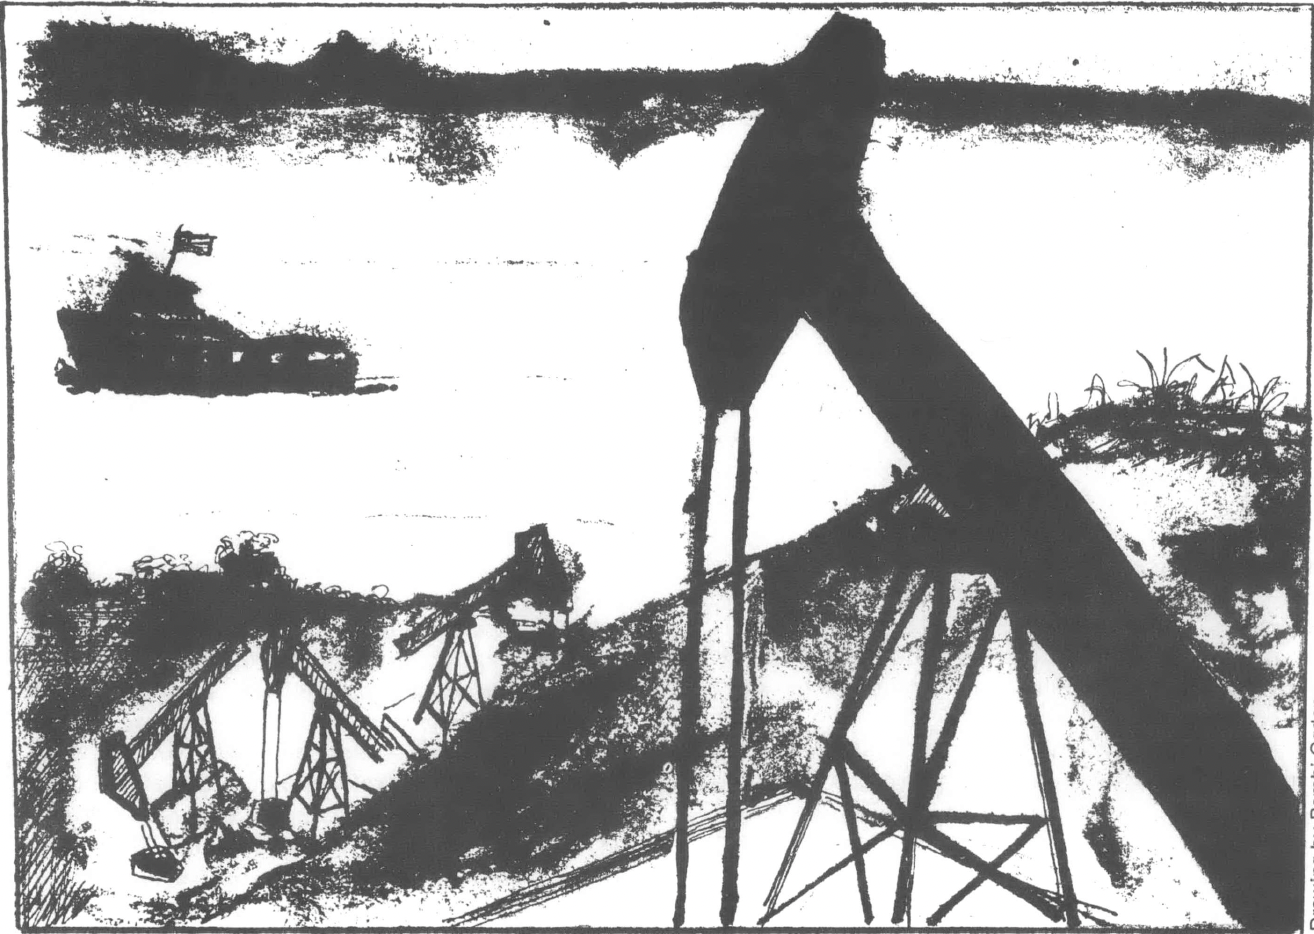 Black and white drawing of oil rig silhouette